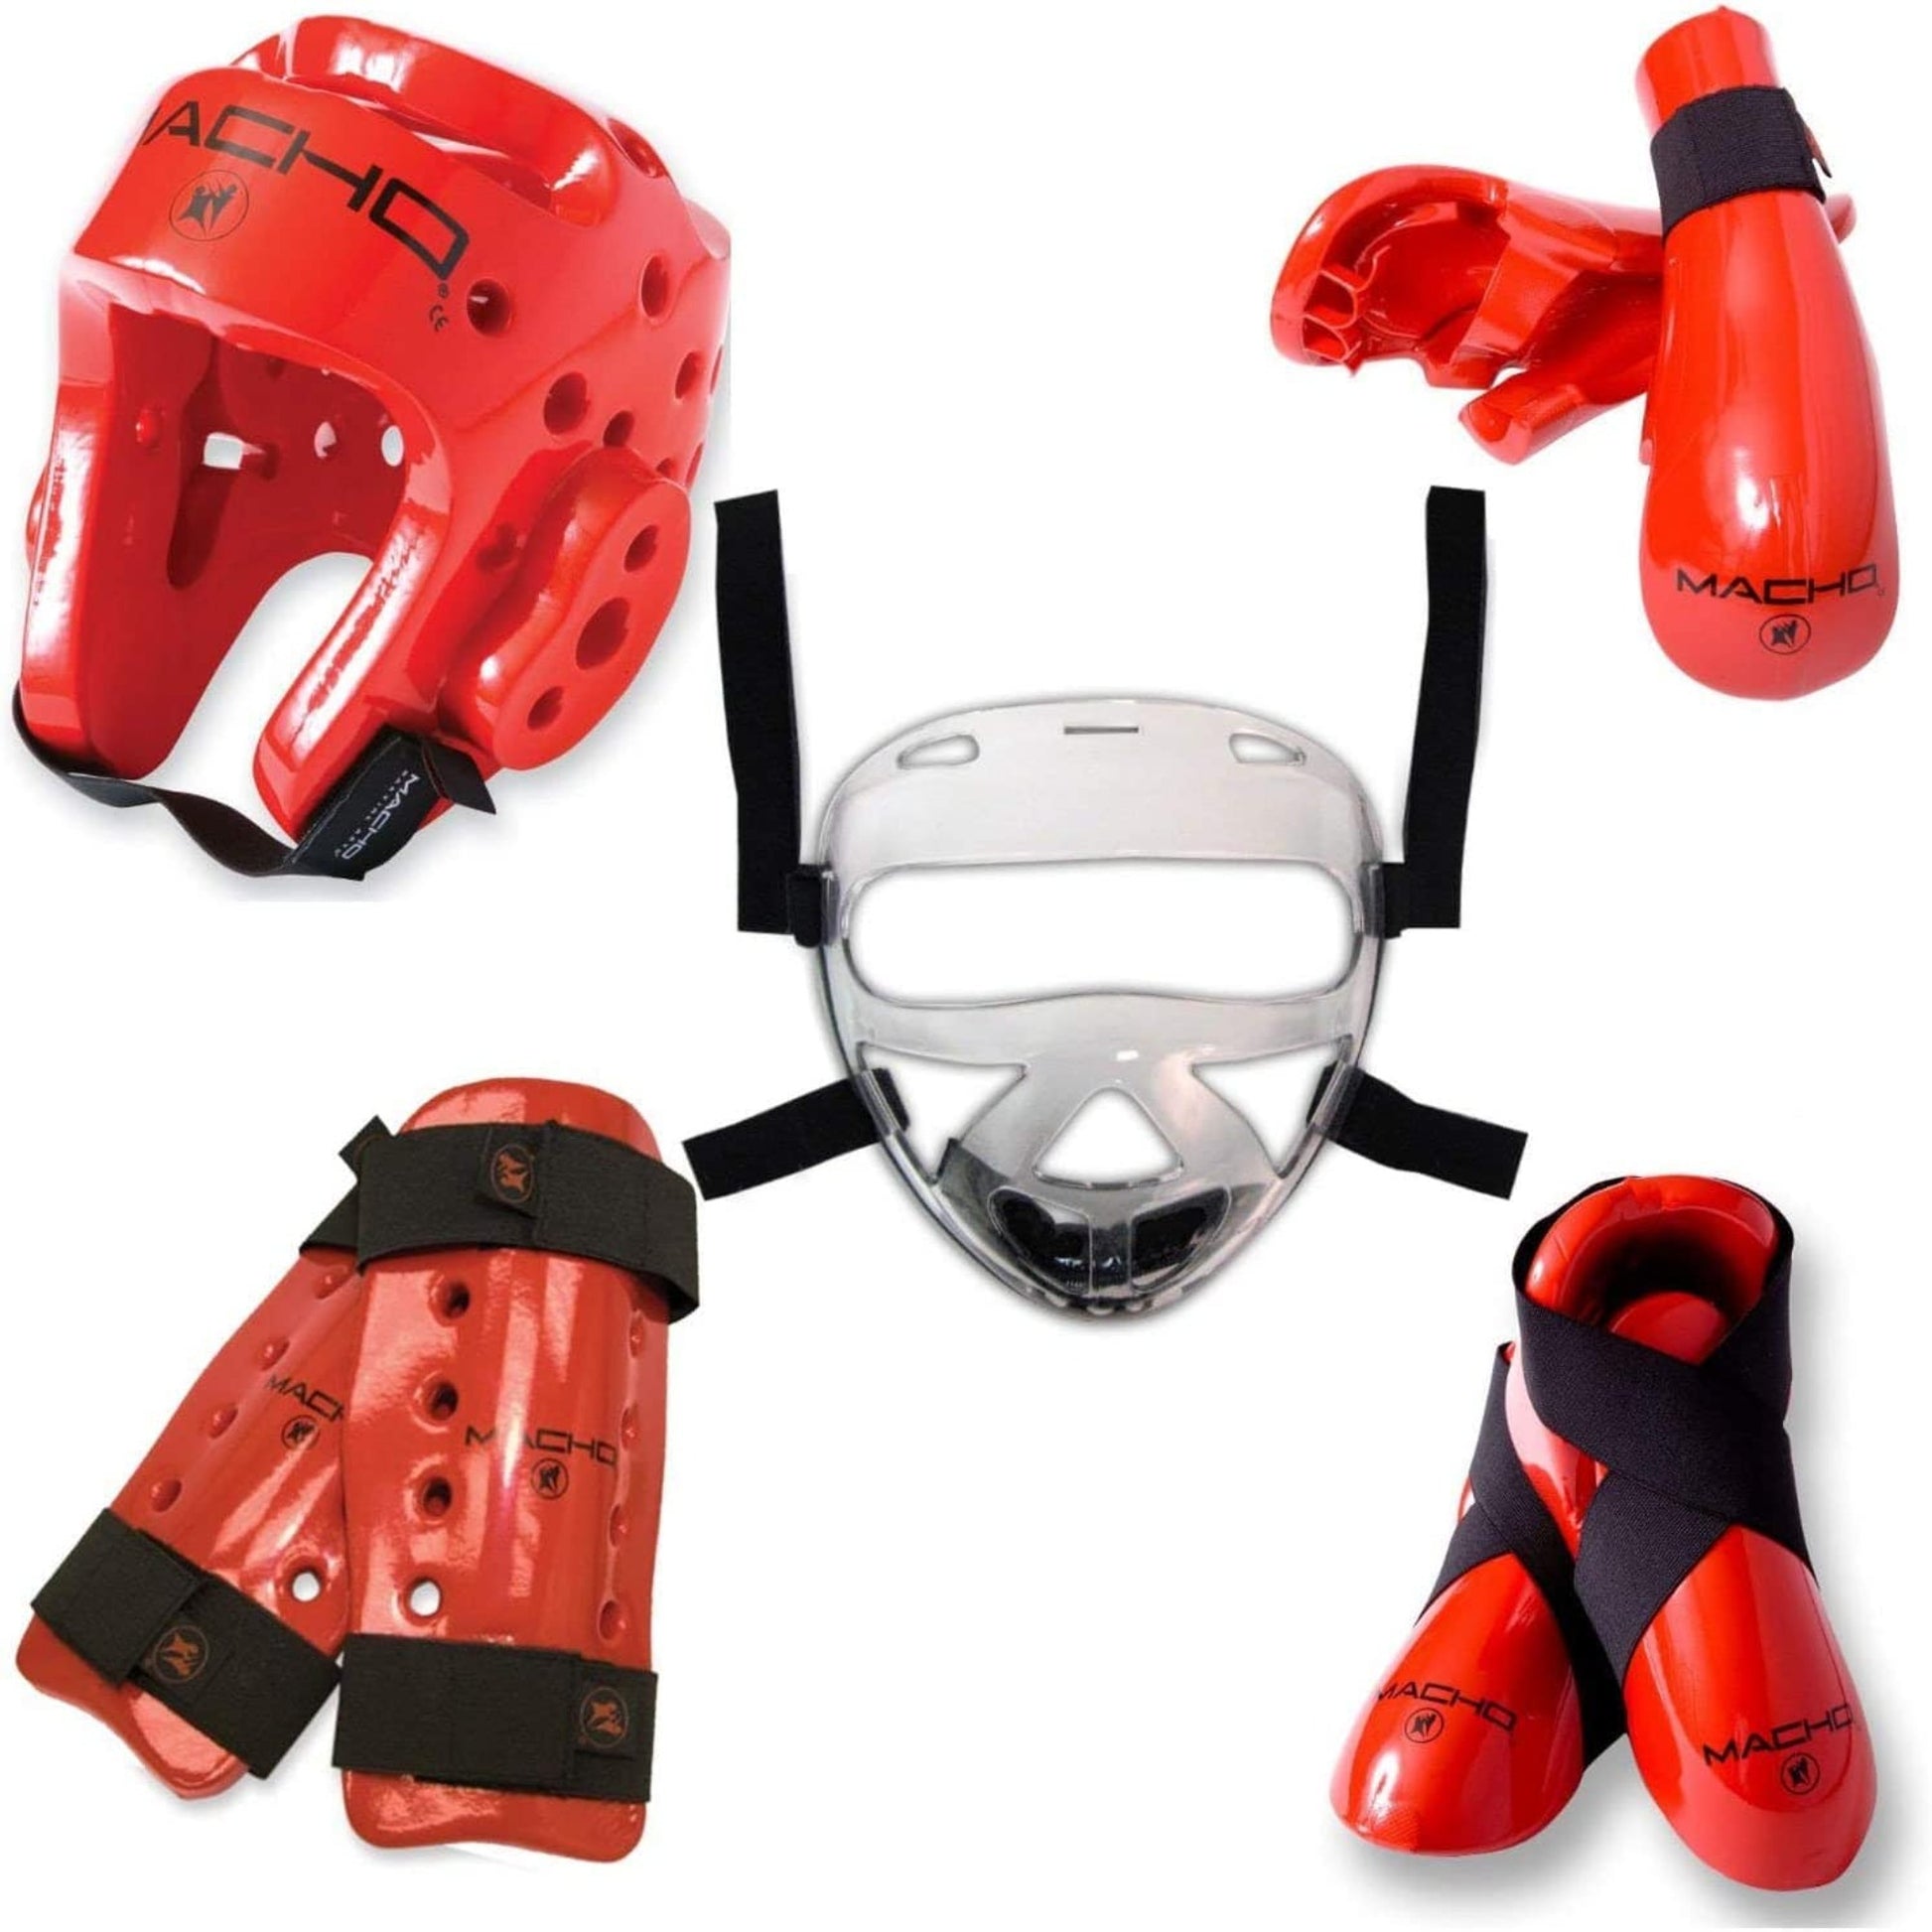 Macho sporting goods Macho Dyna 9 Piece Sparring Gear Set with shin Guards and face Shield